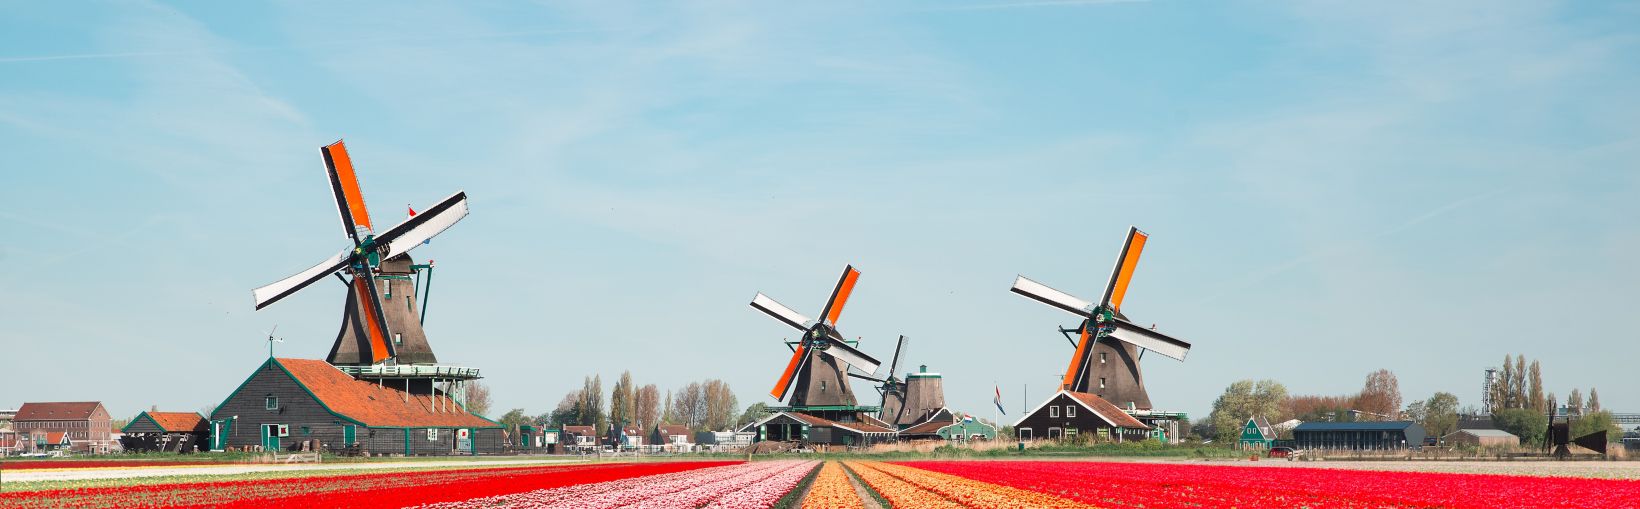 Landscape of Netherlands bouquet of tulips and windmills in the Netherlands.